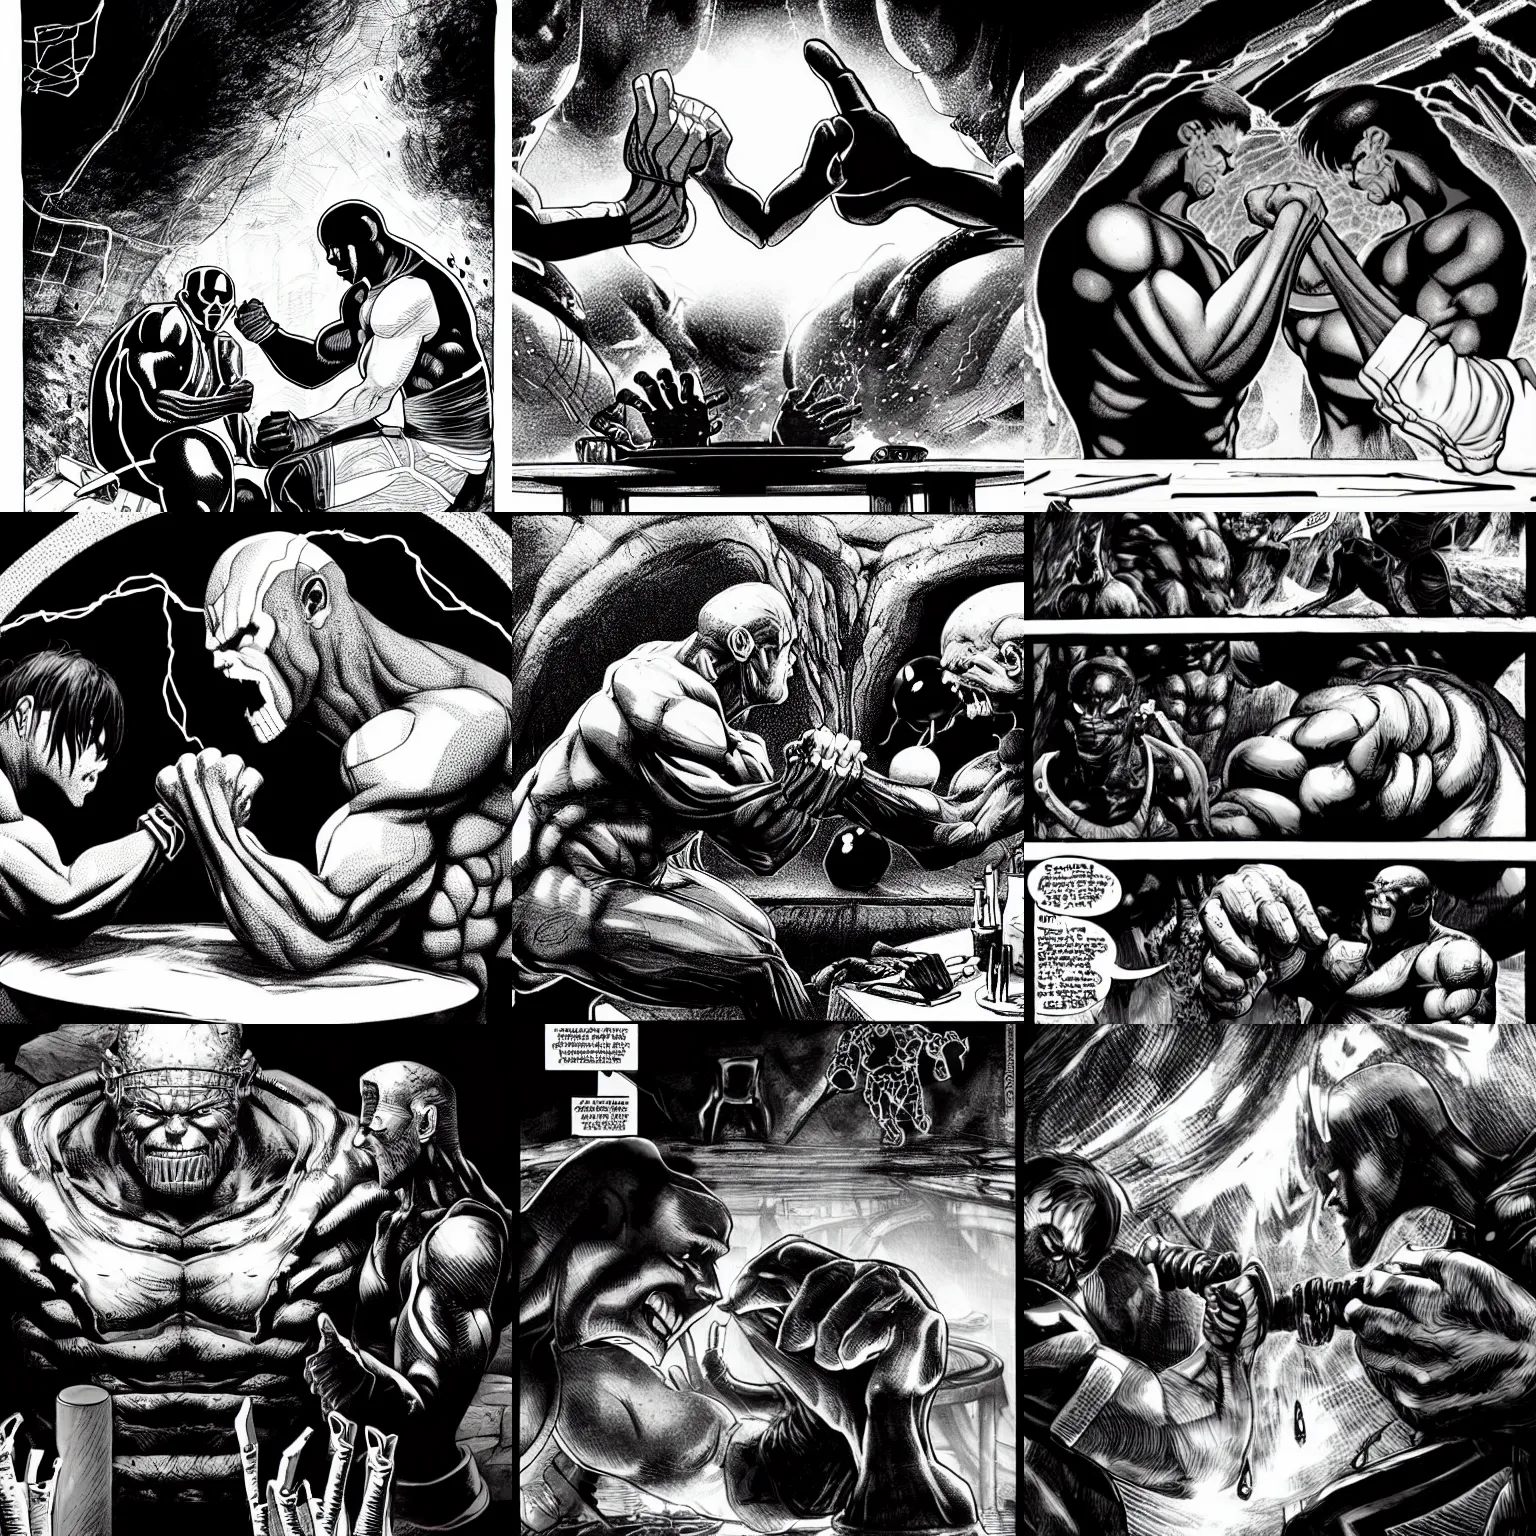 Prompt: black and white thanos plays arm wrestling with the thanos at a broken table in a cave, by tsutomu nihei, black and white, old cave with slime and wires background